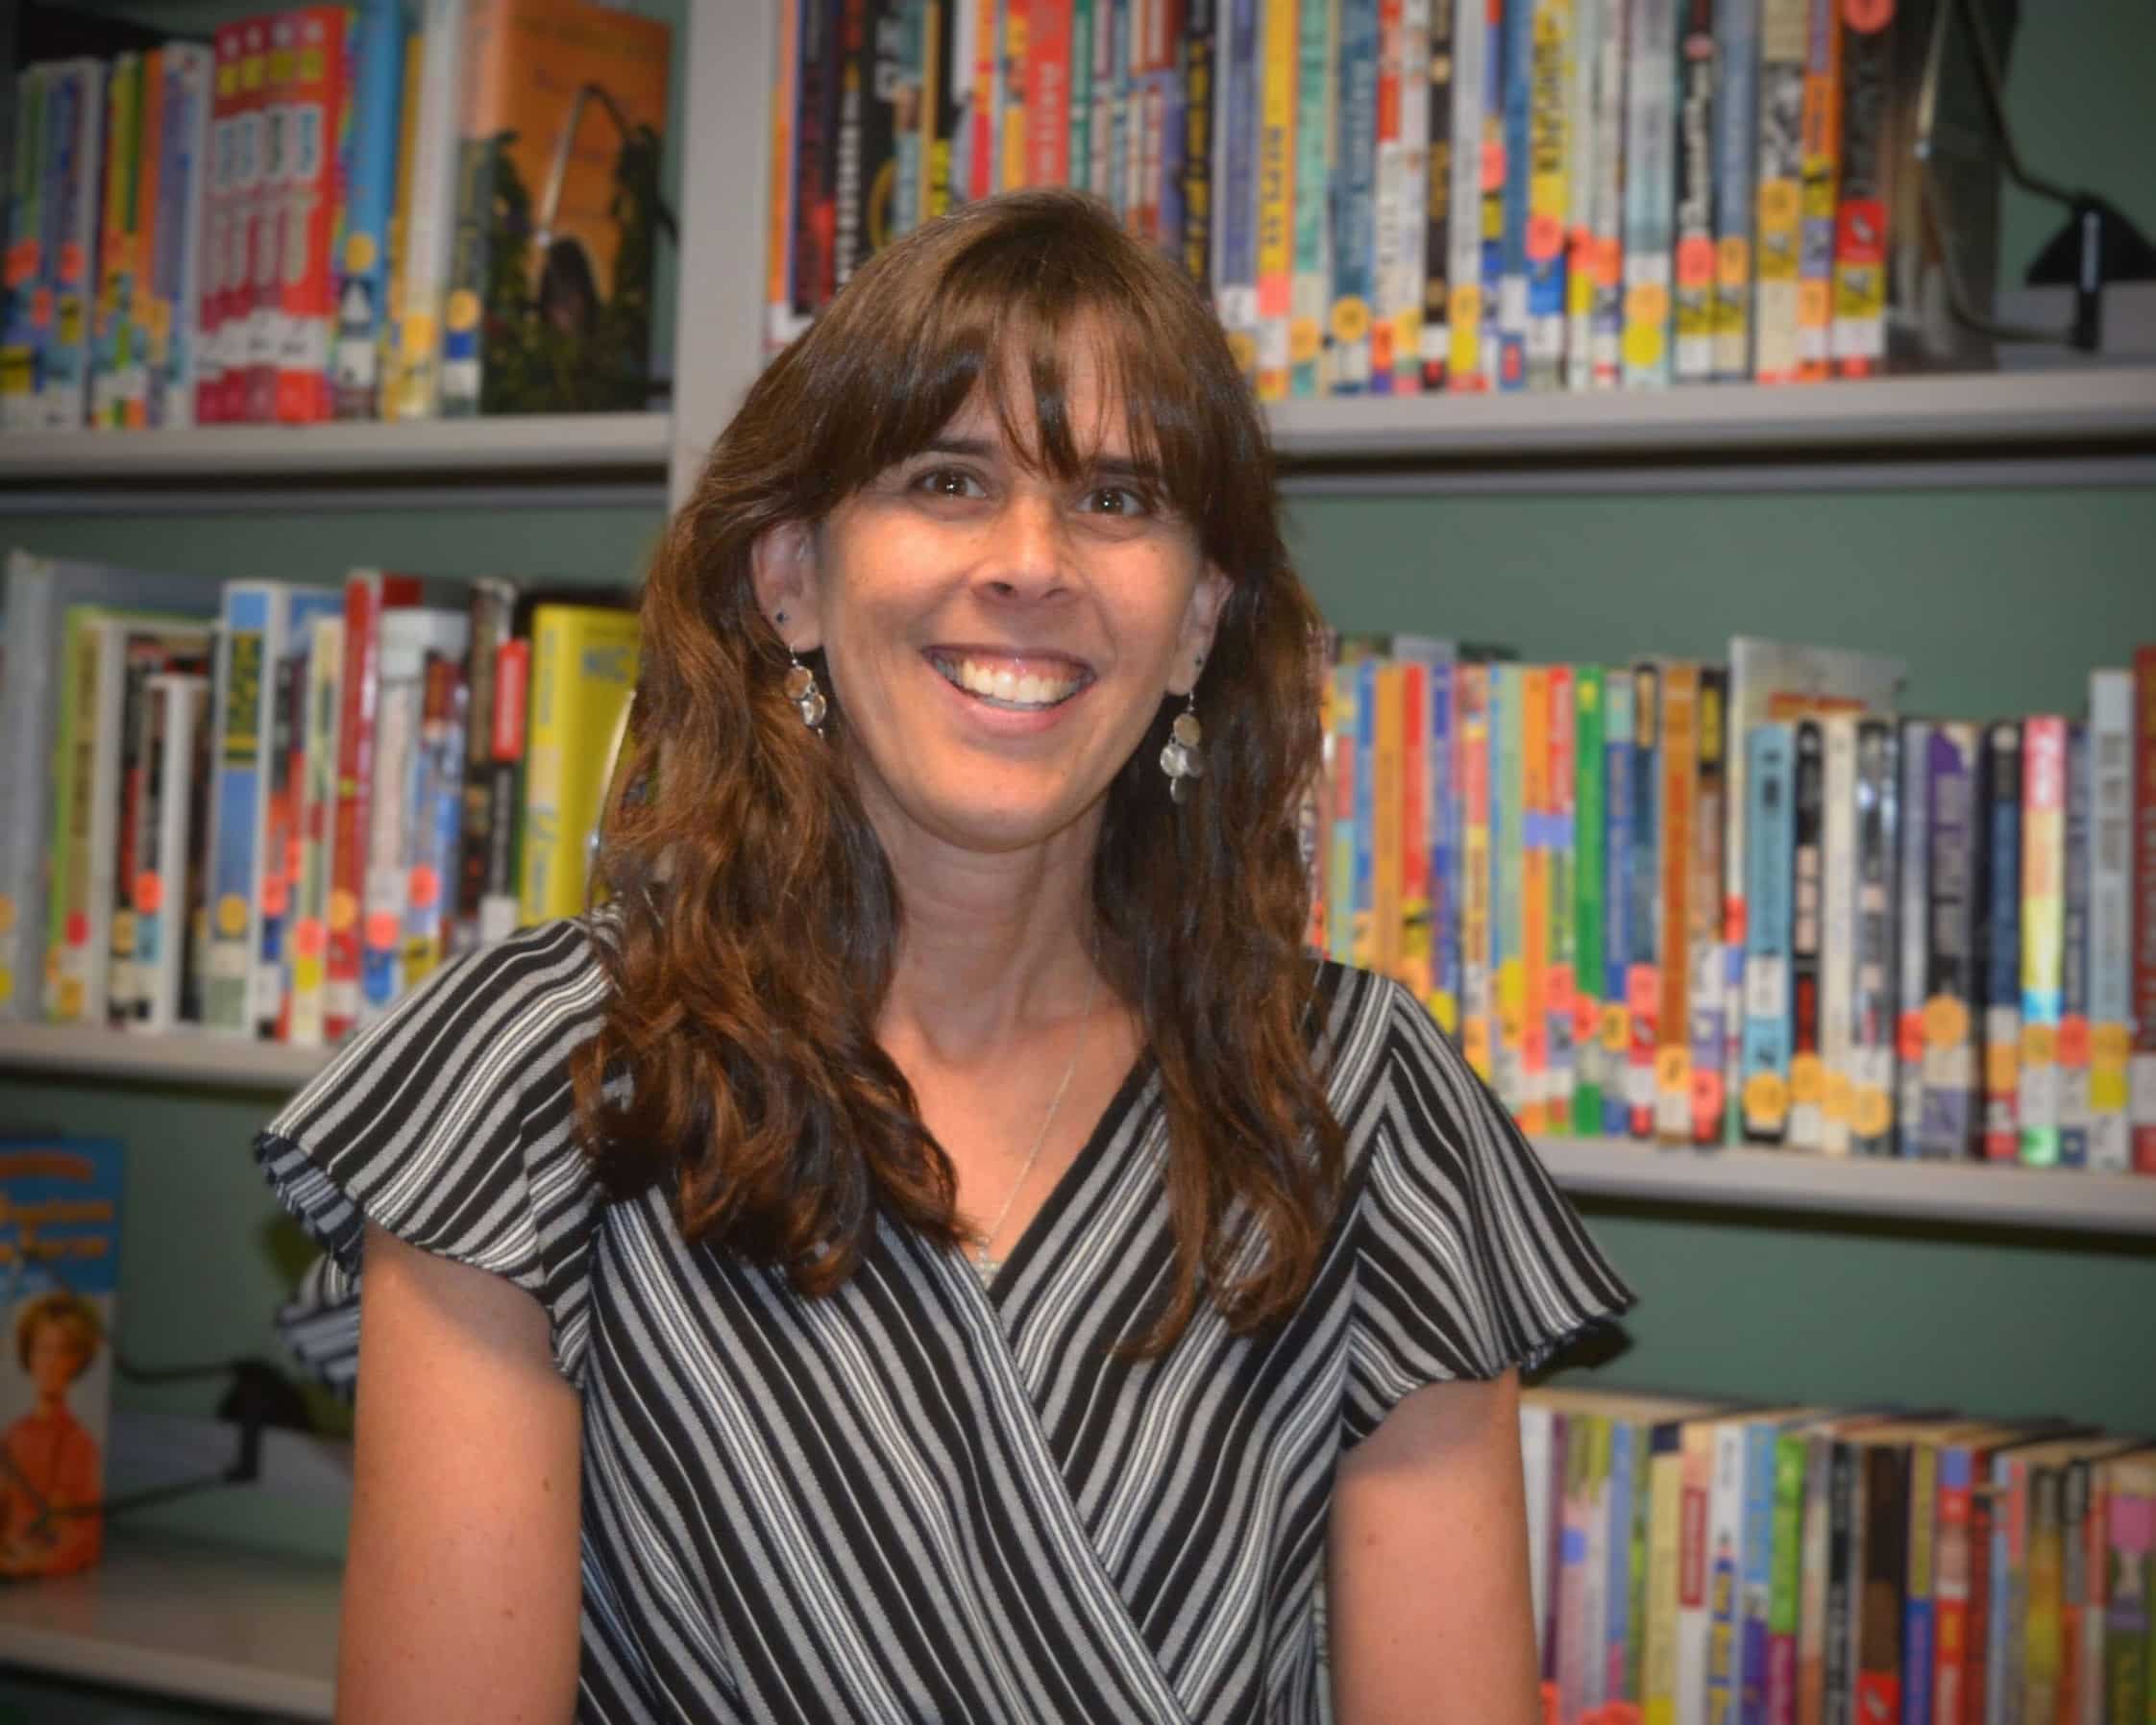 A woman smiling in front of a bookshelf.